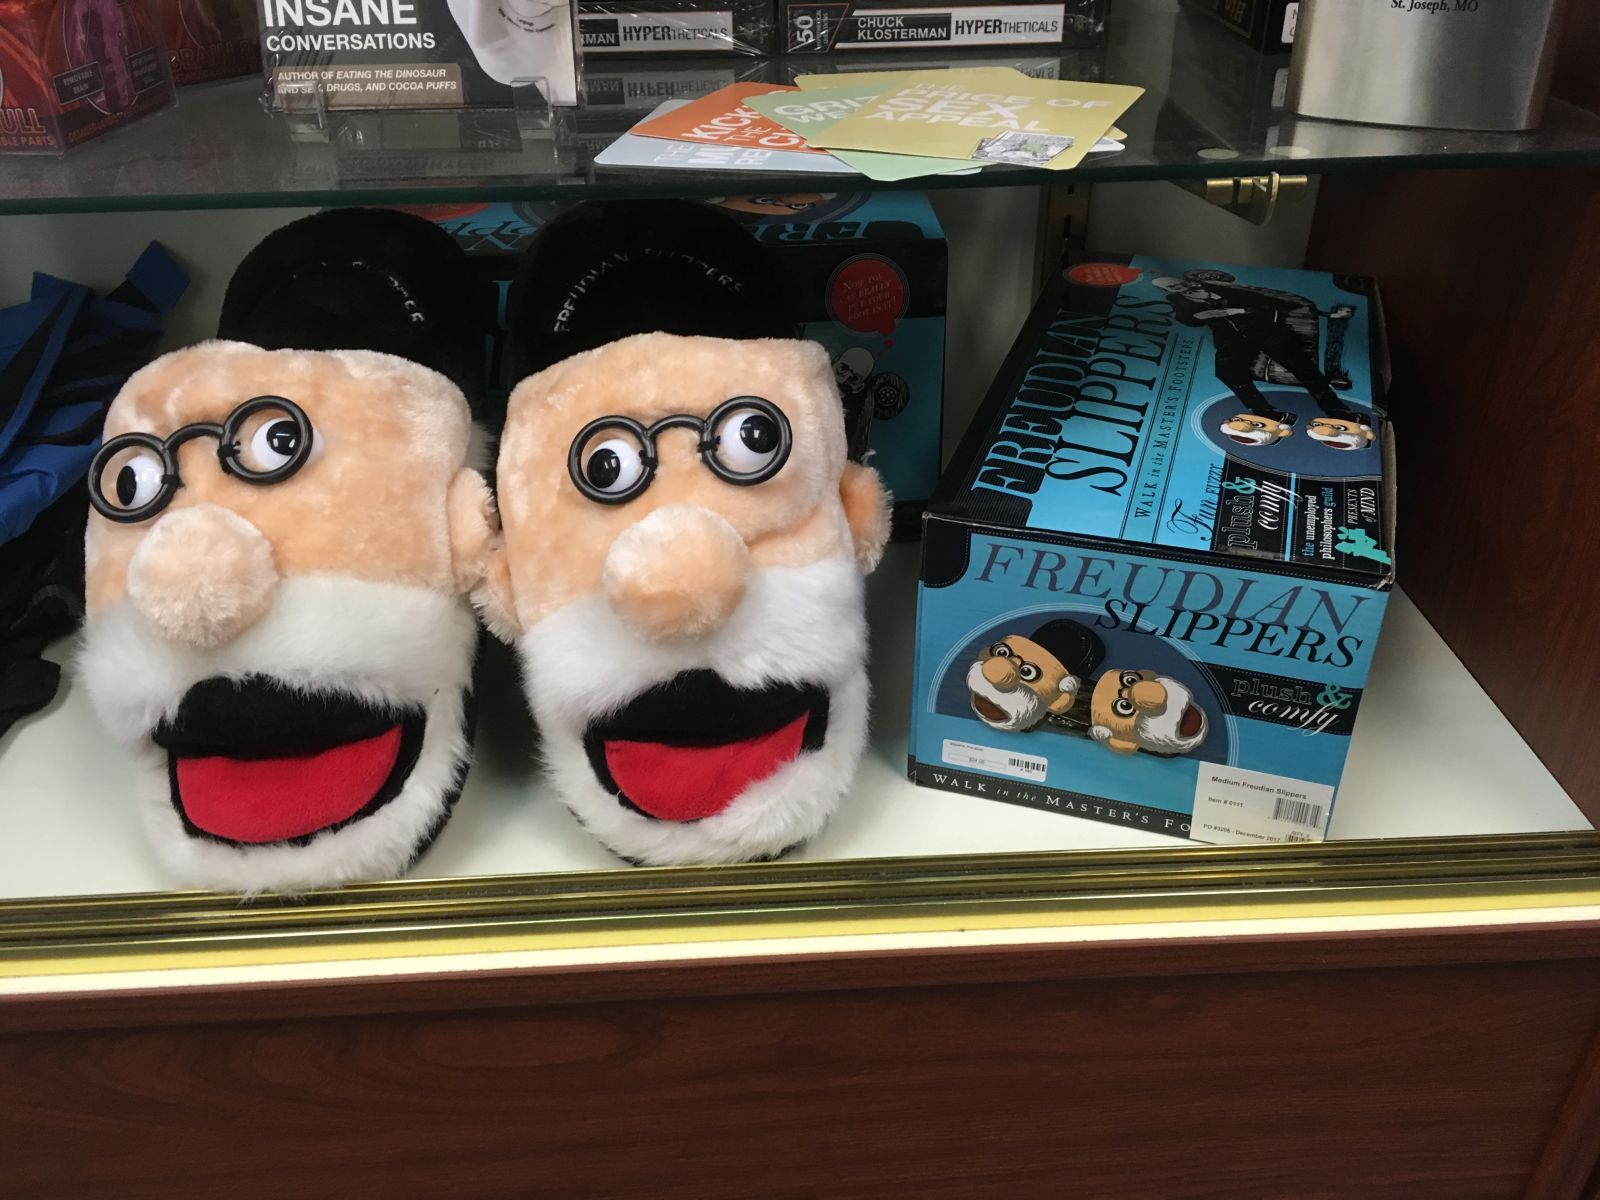 I almost bought these